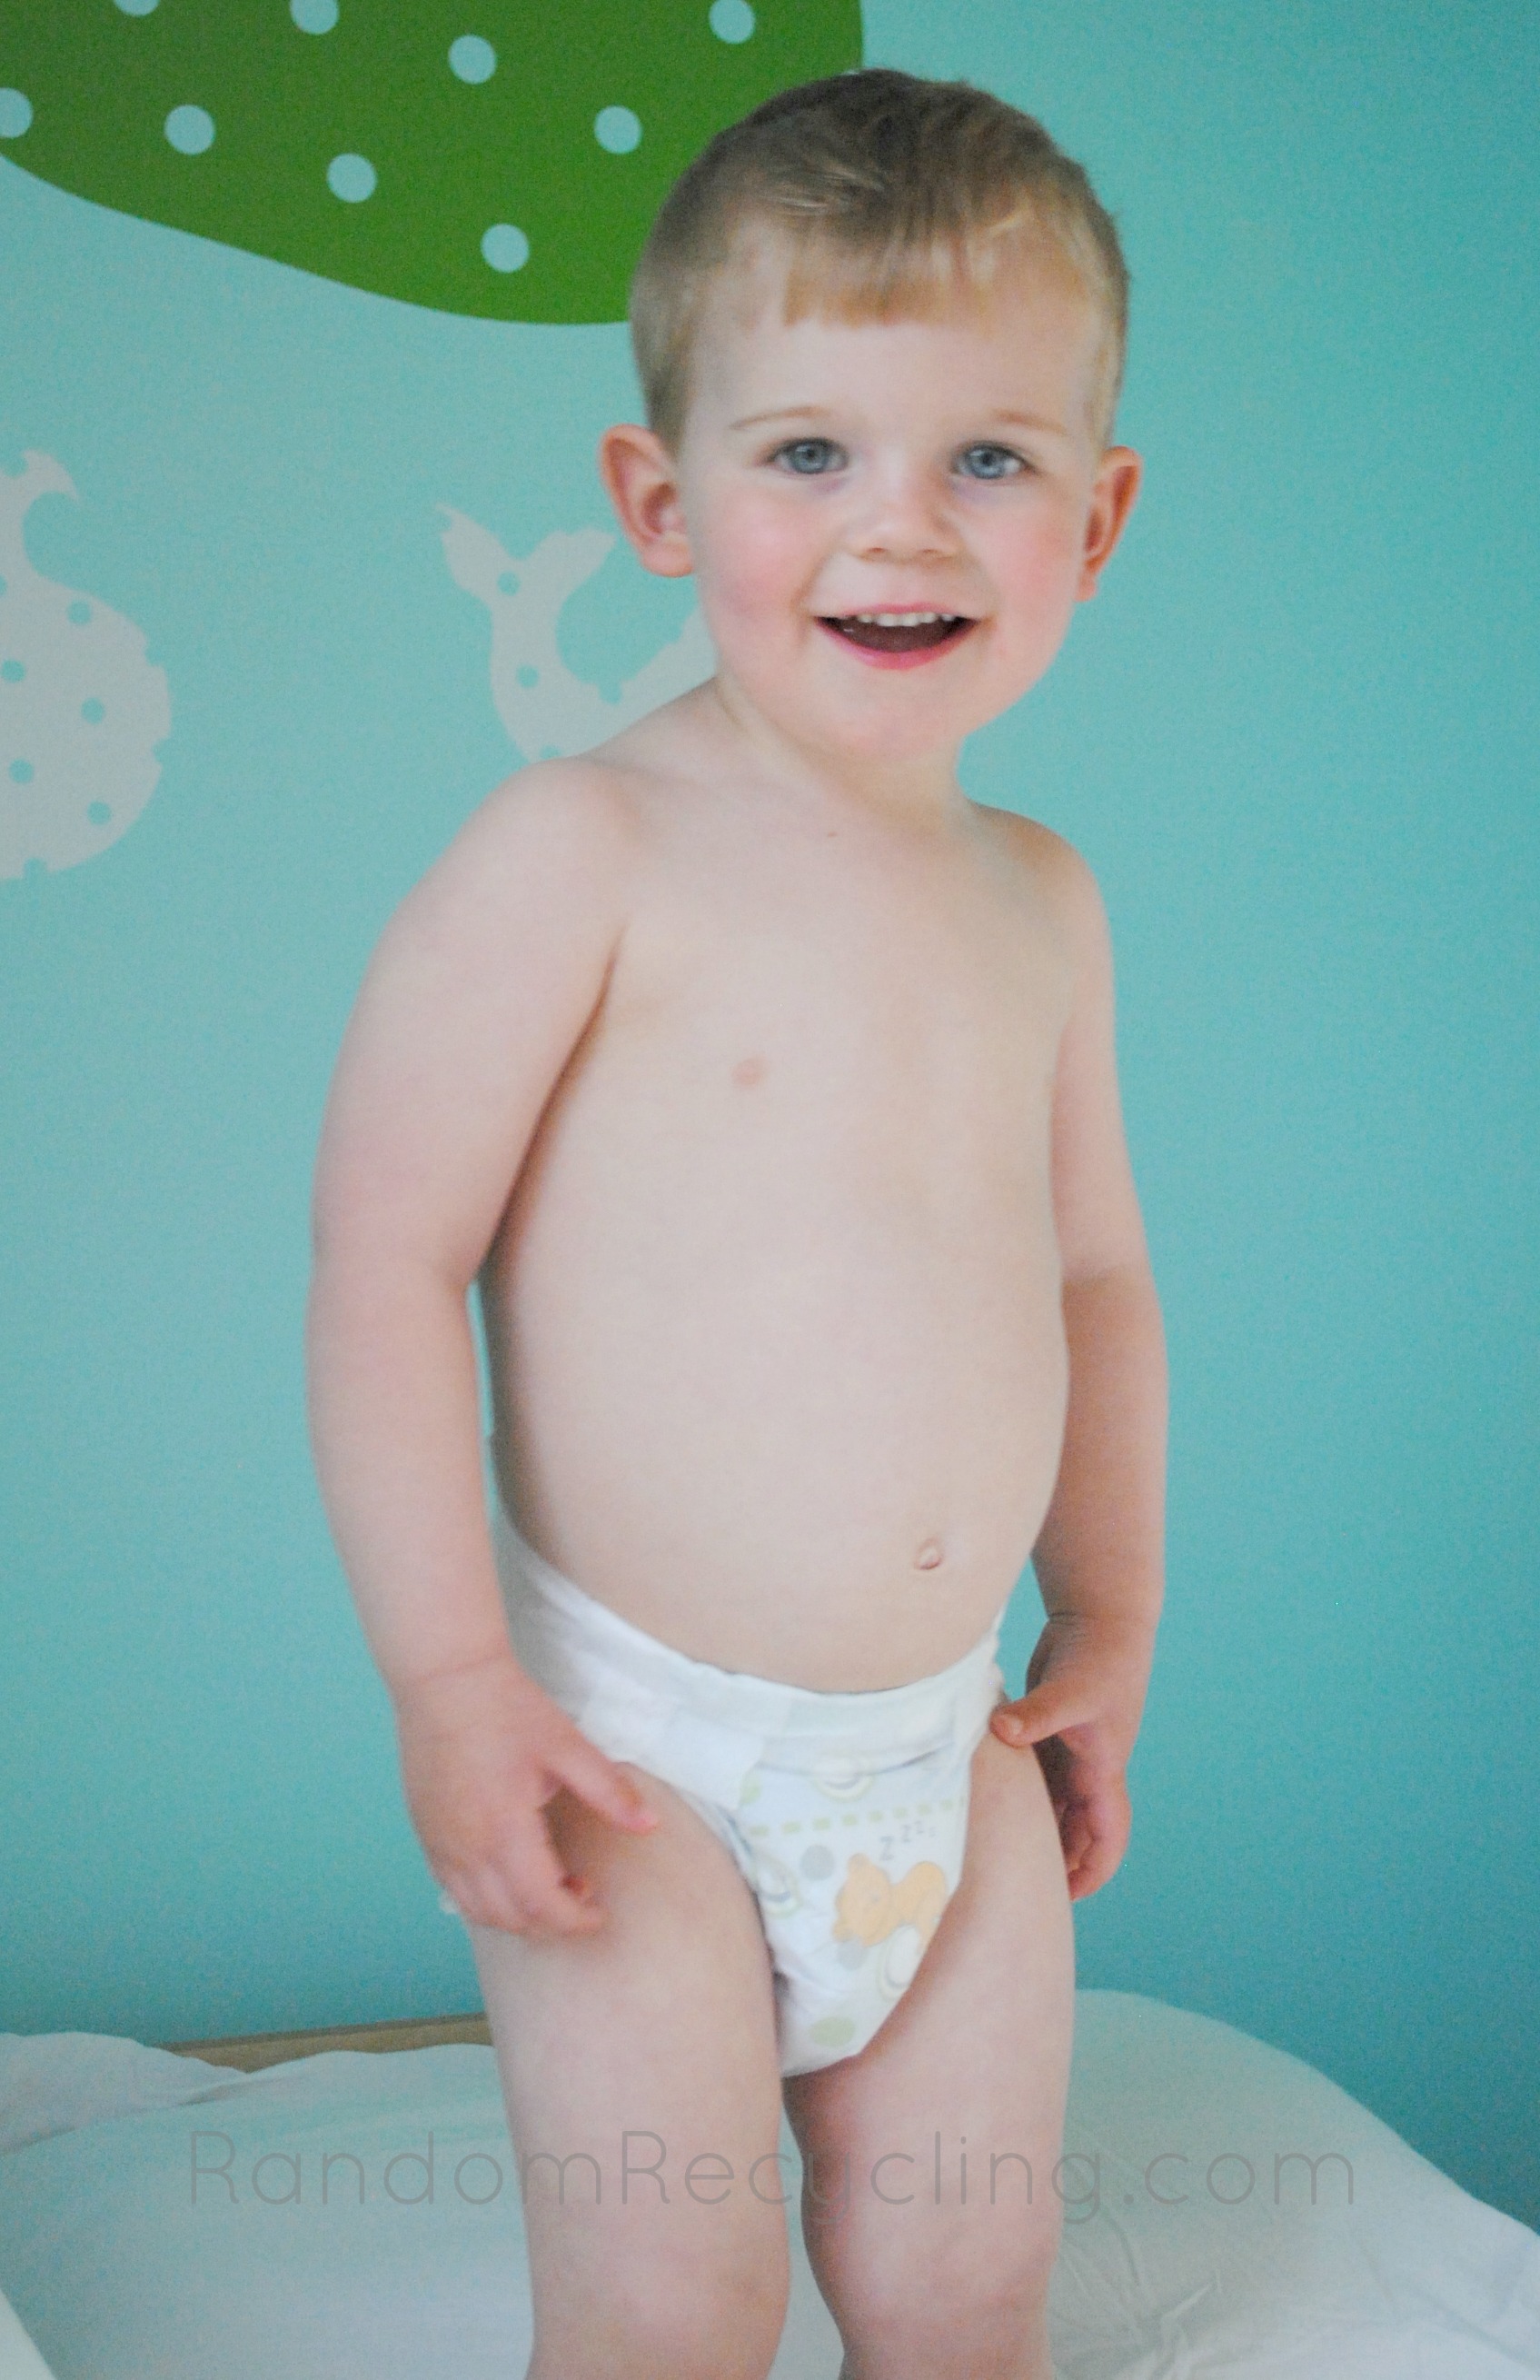 Parents Choice Diapers Sizing - Emily Roach Health Coach